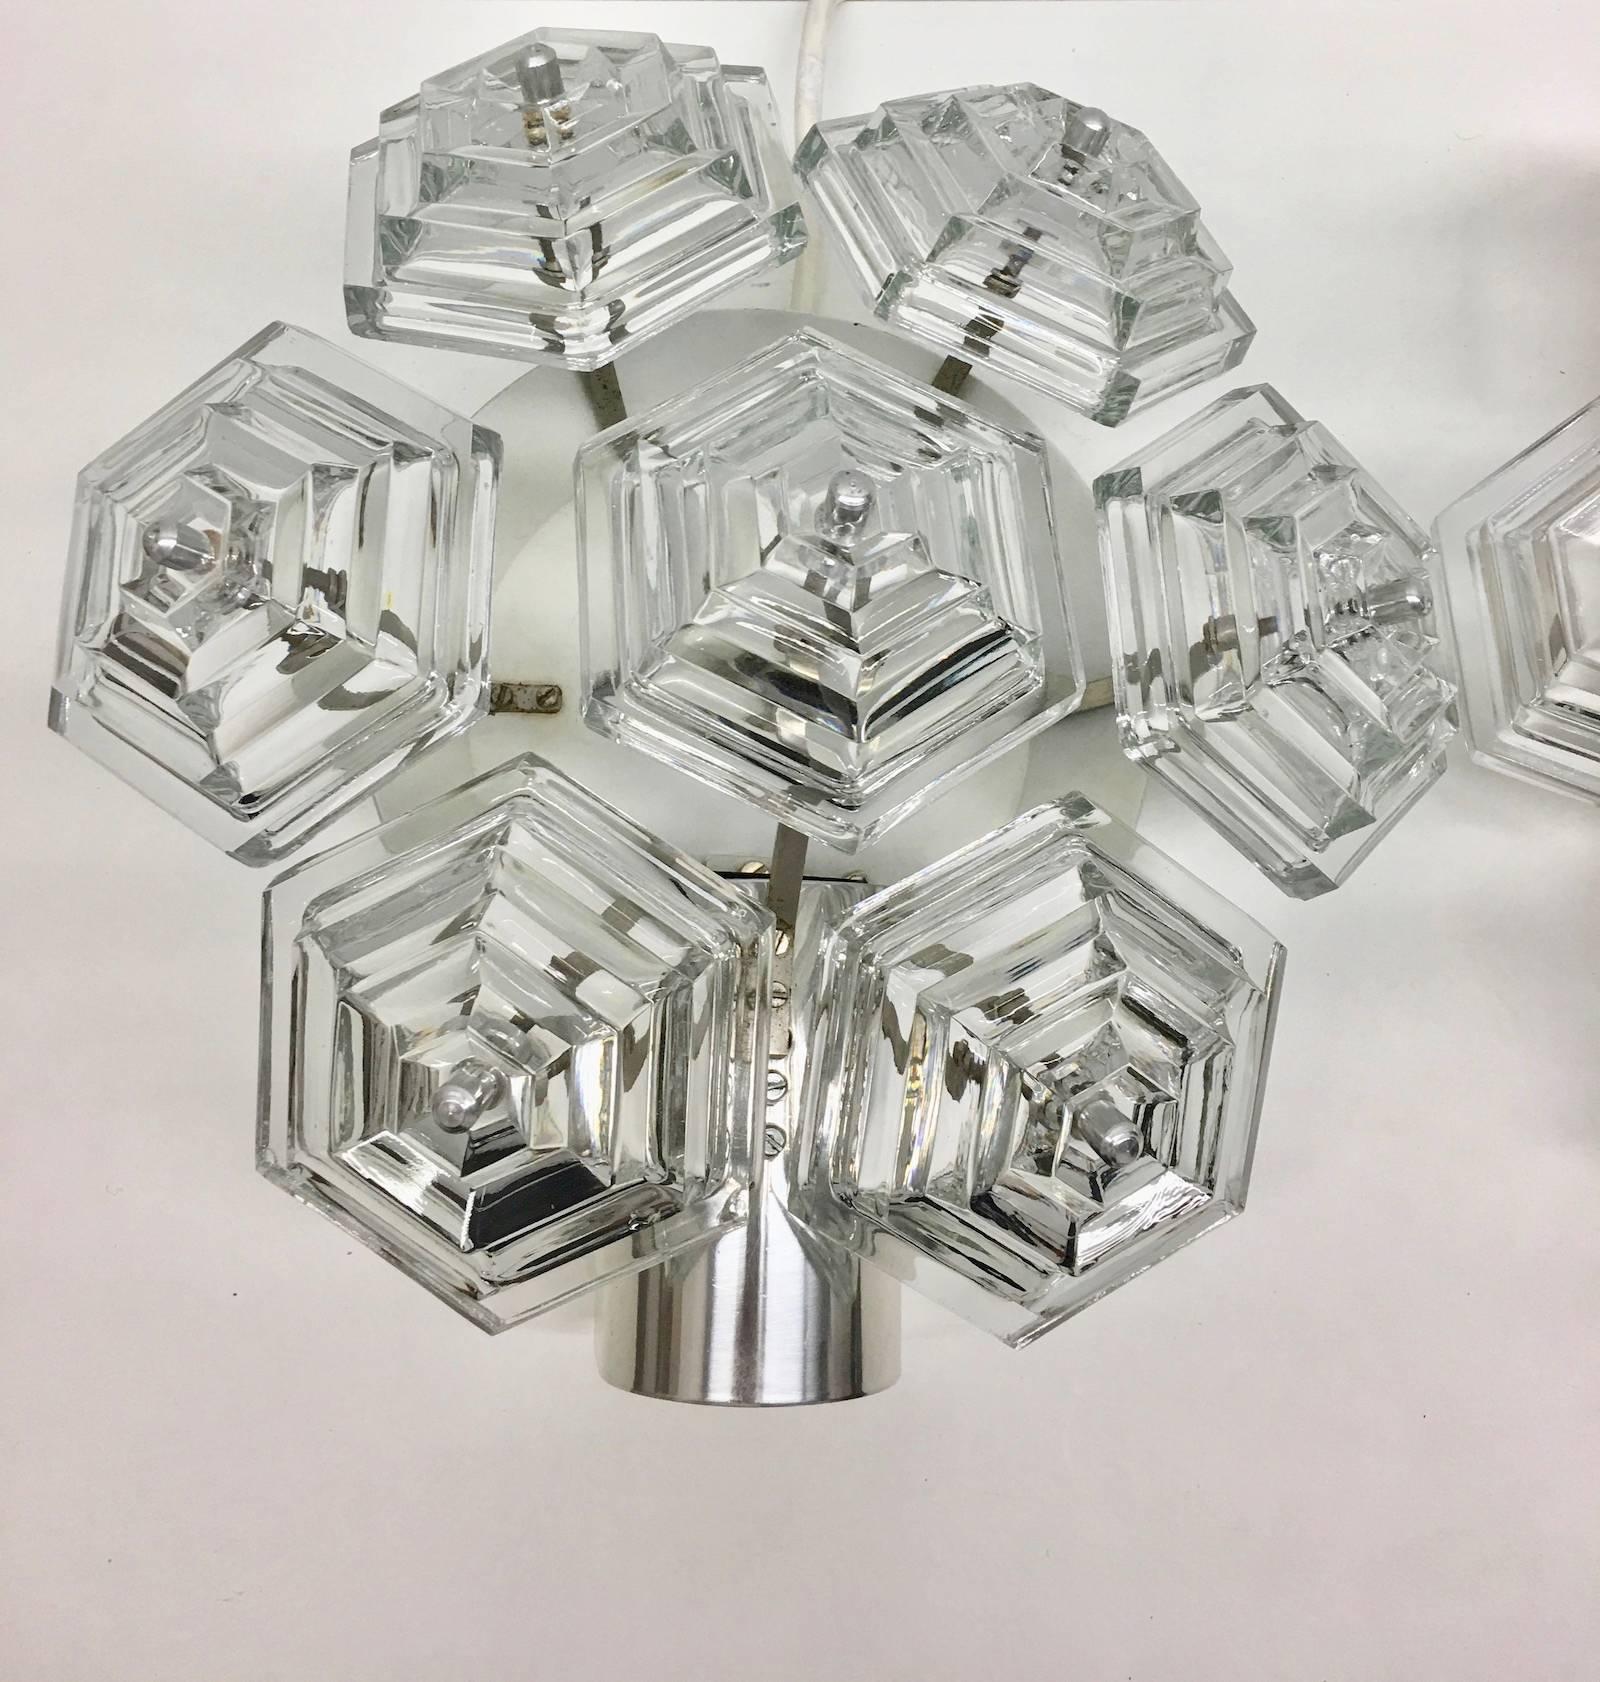 A beautiful pair of chrome and glass prism sconce. By VEB Kristall Leuchten in the GDR. Each fixture requires one European E27 Edison bulb, up to 60 watts.
Note: Due to the vintage nature of this fixtures, there may be some nicks or imperfections